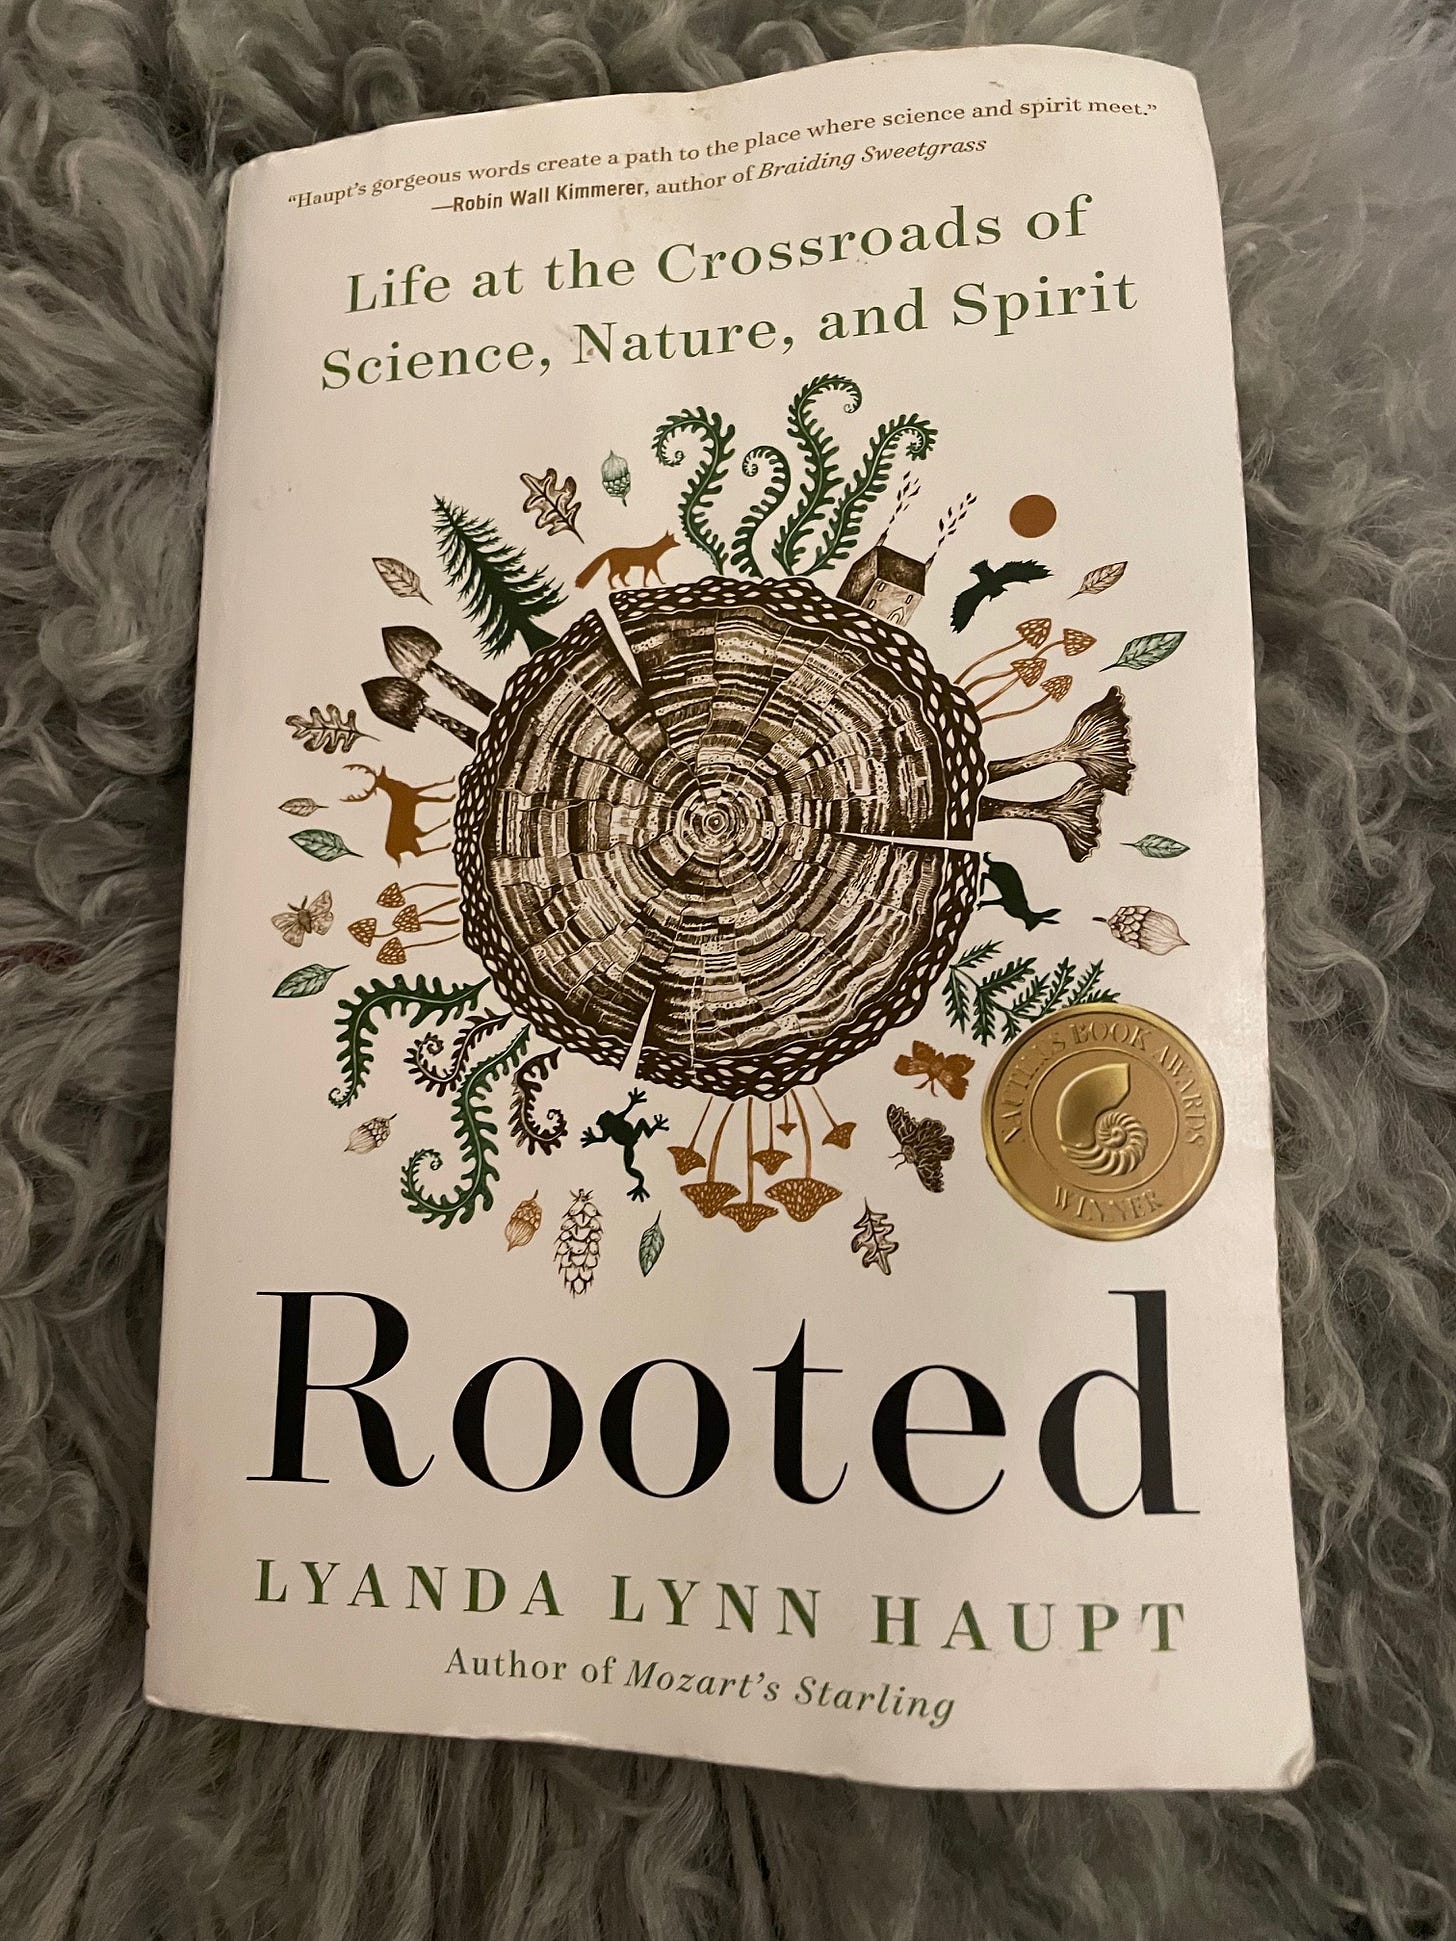 Picture of the cover of the book, Rooted